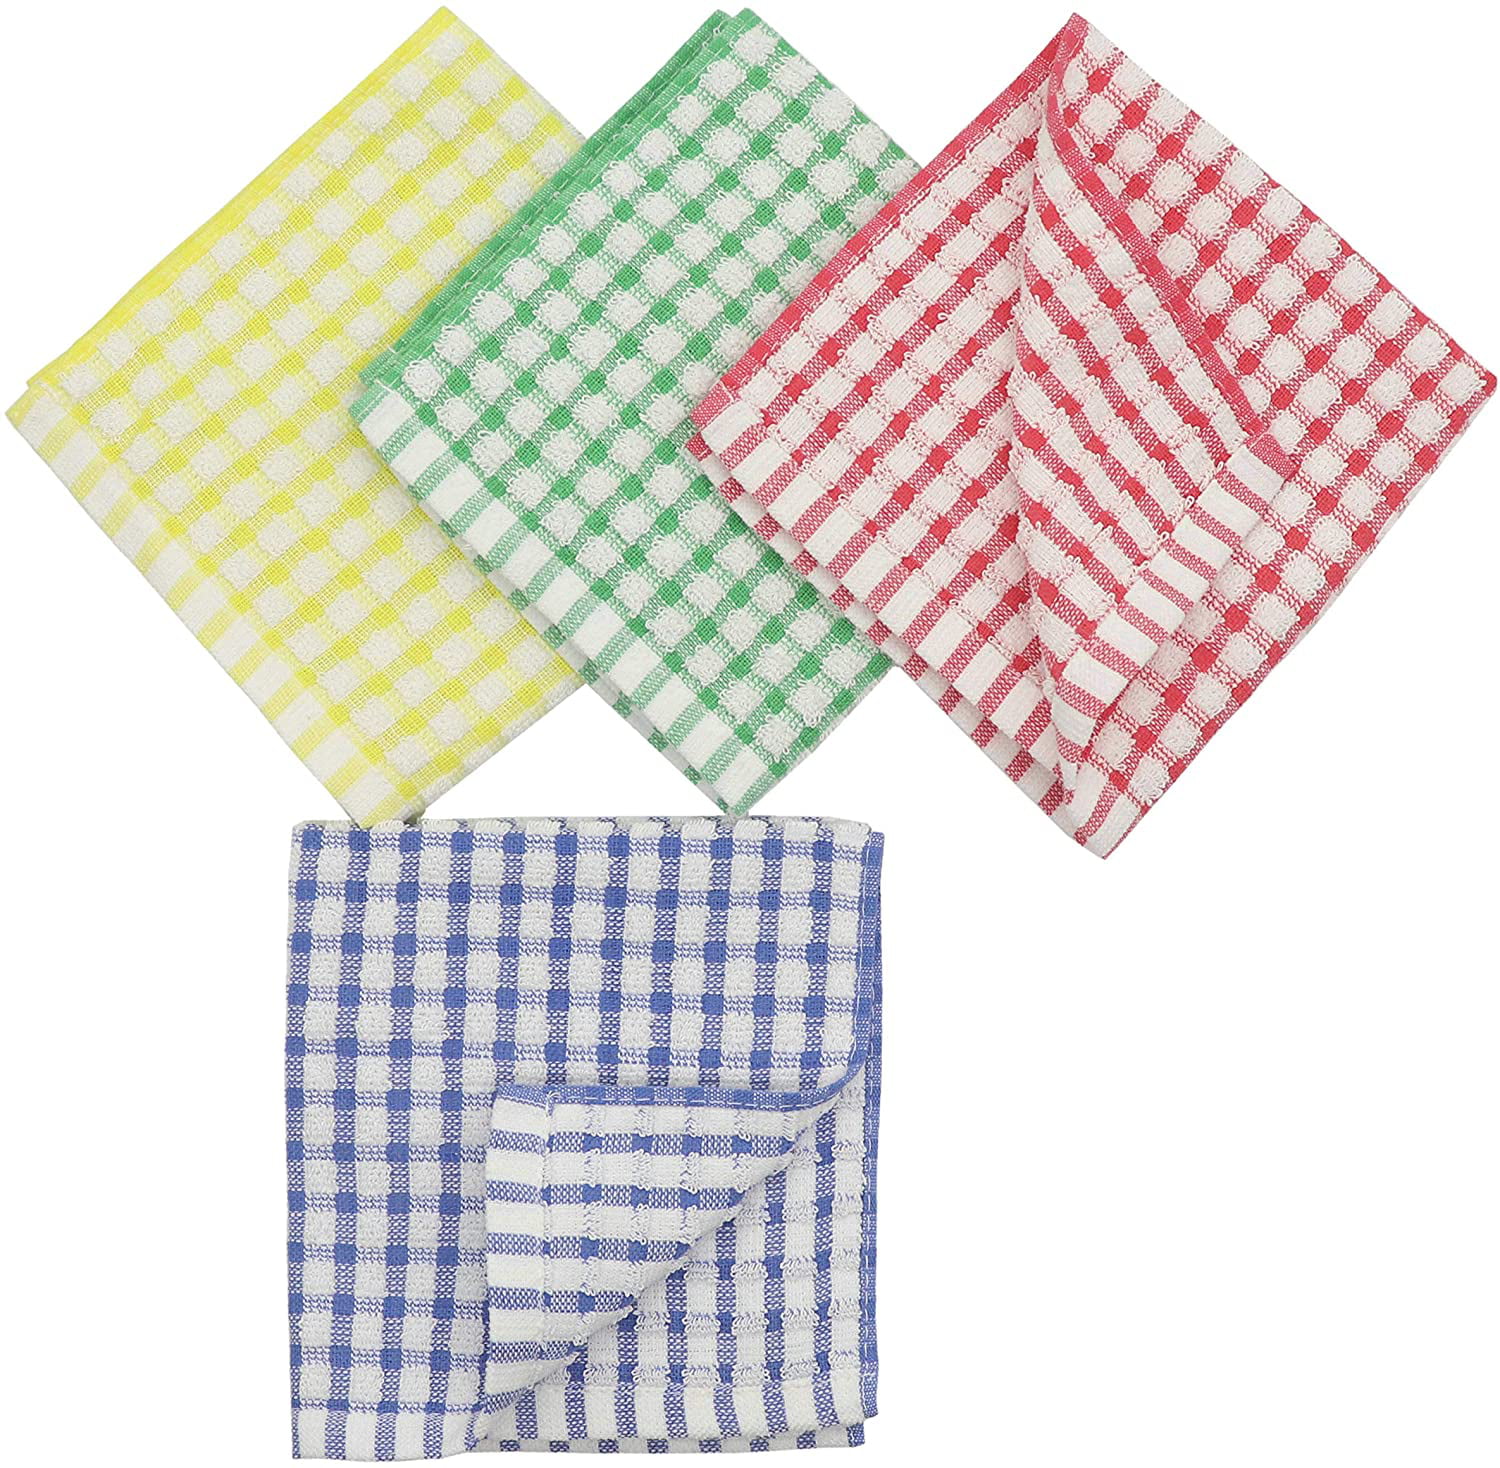 Nialnant 100% Cotton Dish Cloths for Washing Dishes,6 Pack Soft Absorbent  Kitchen Towels and Dishcloths Sets,Quick Drying Dish Rags 12x12  Inches,Multi